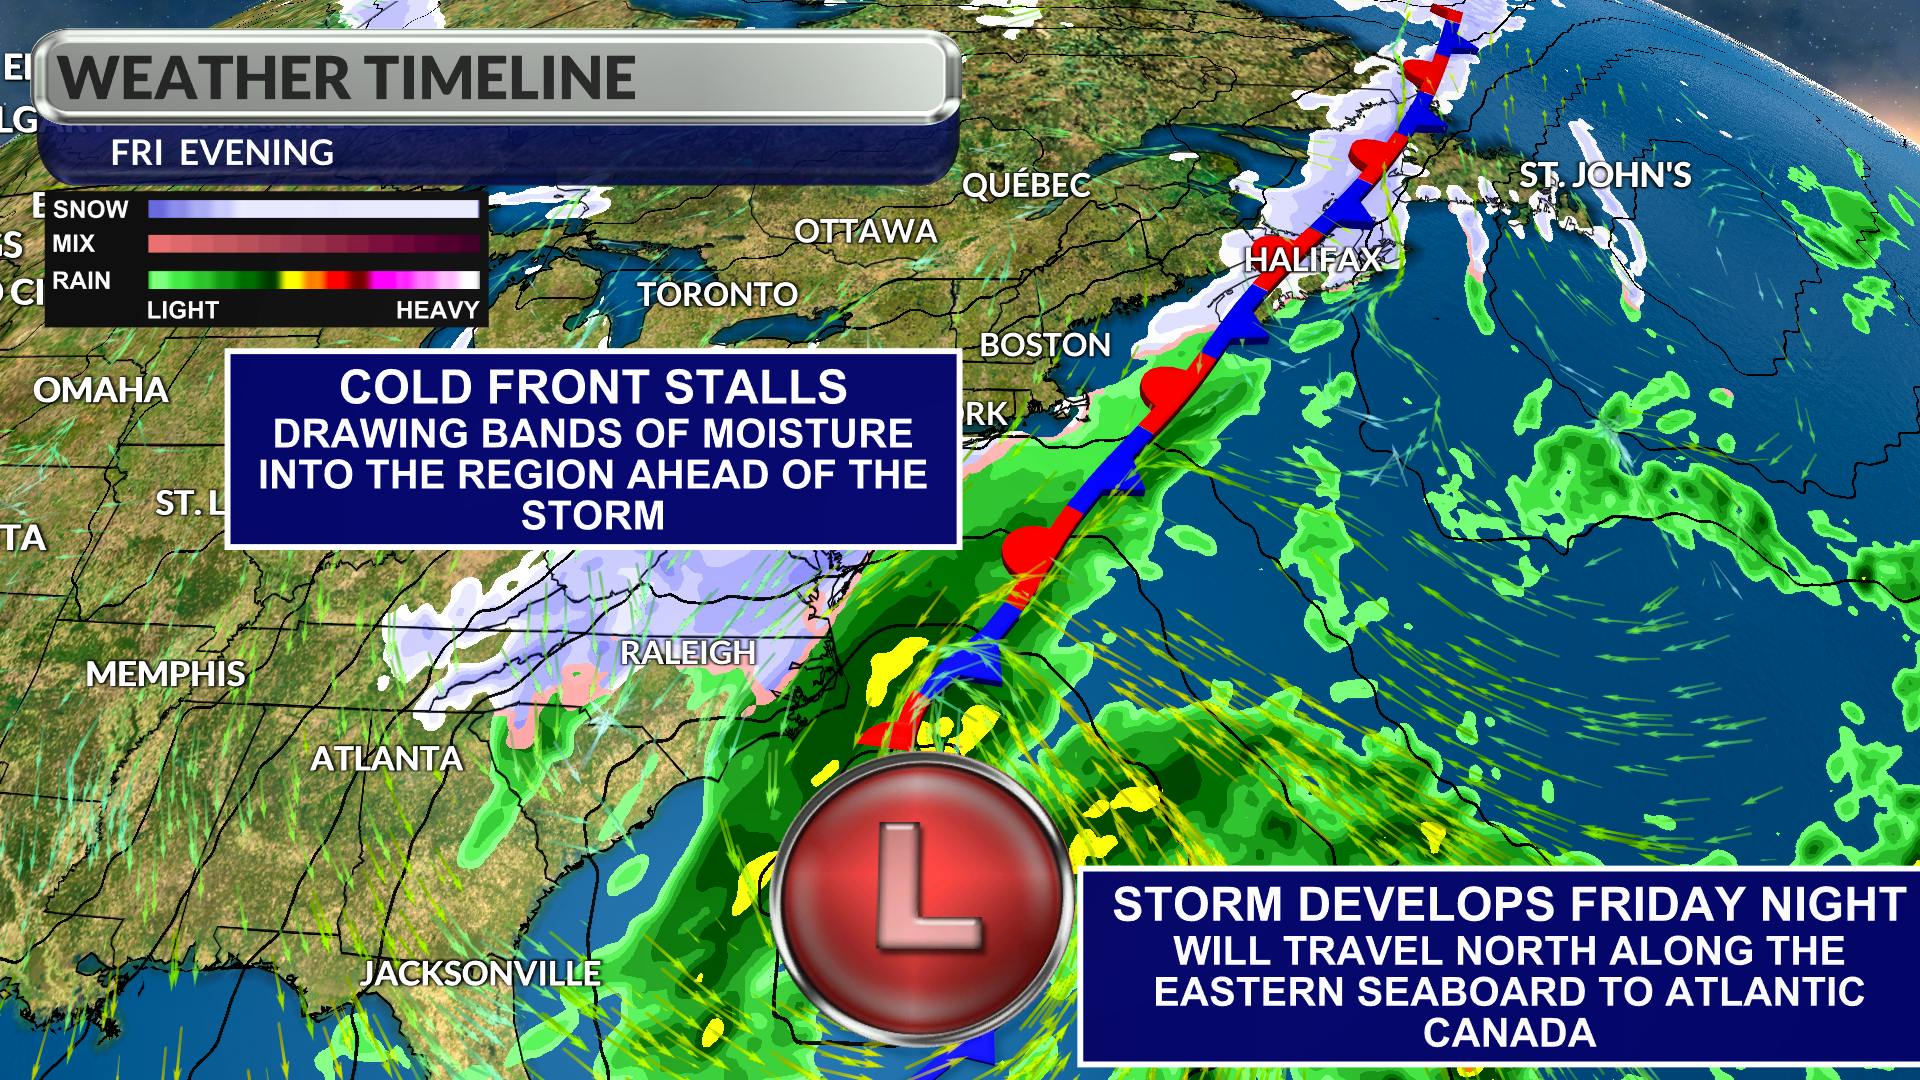 A powerful storm will develop off Cape Hatteras Friday night. -WSI